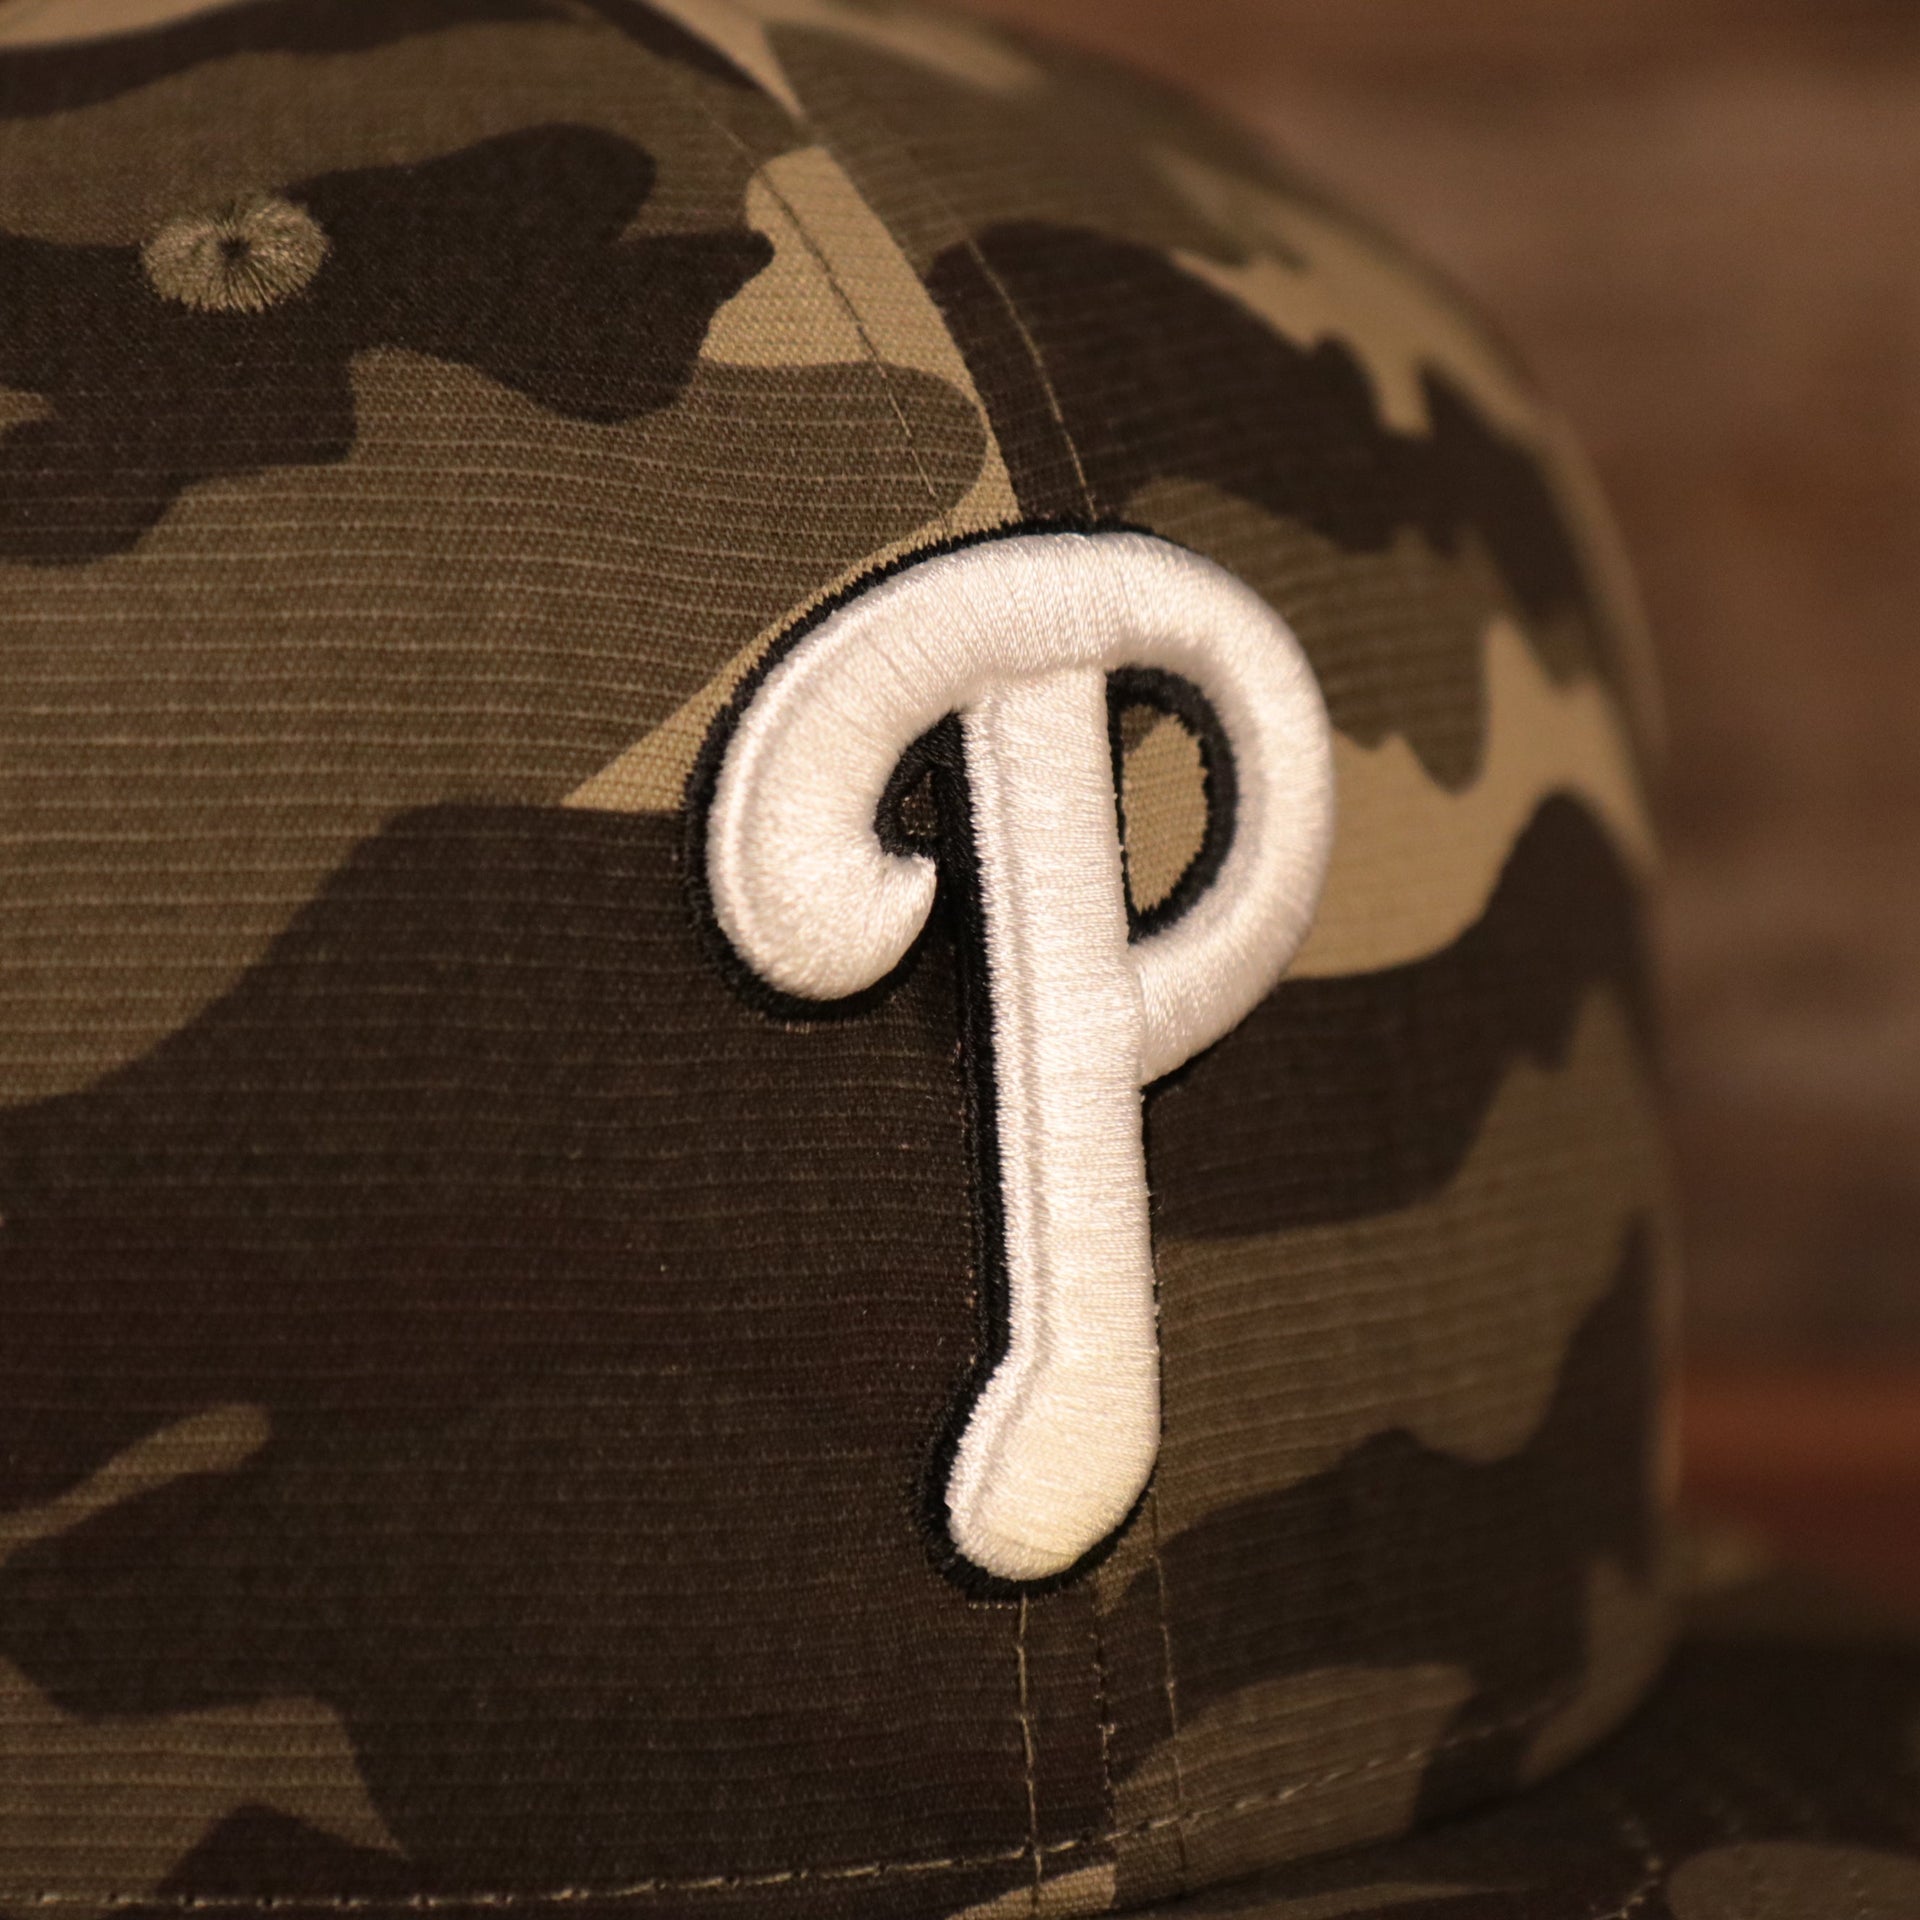 The white Philadelphia Phillies logo on the front of the Phillies Memorial Day hat 2021.